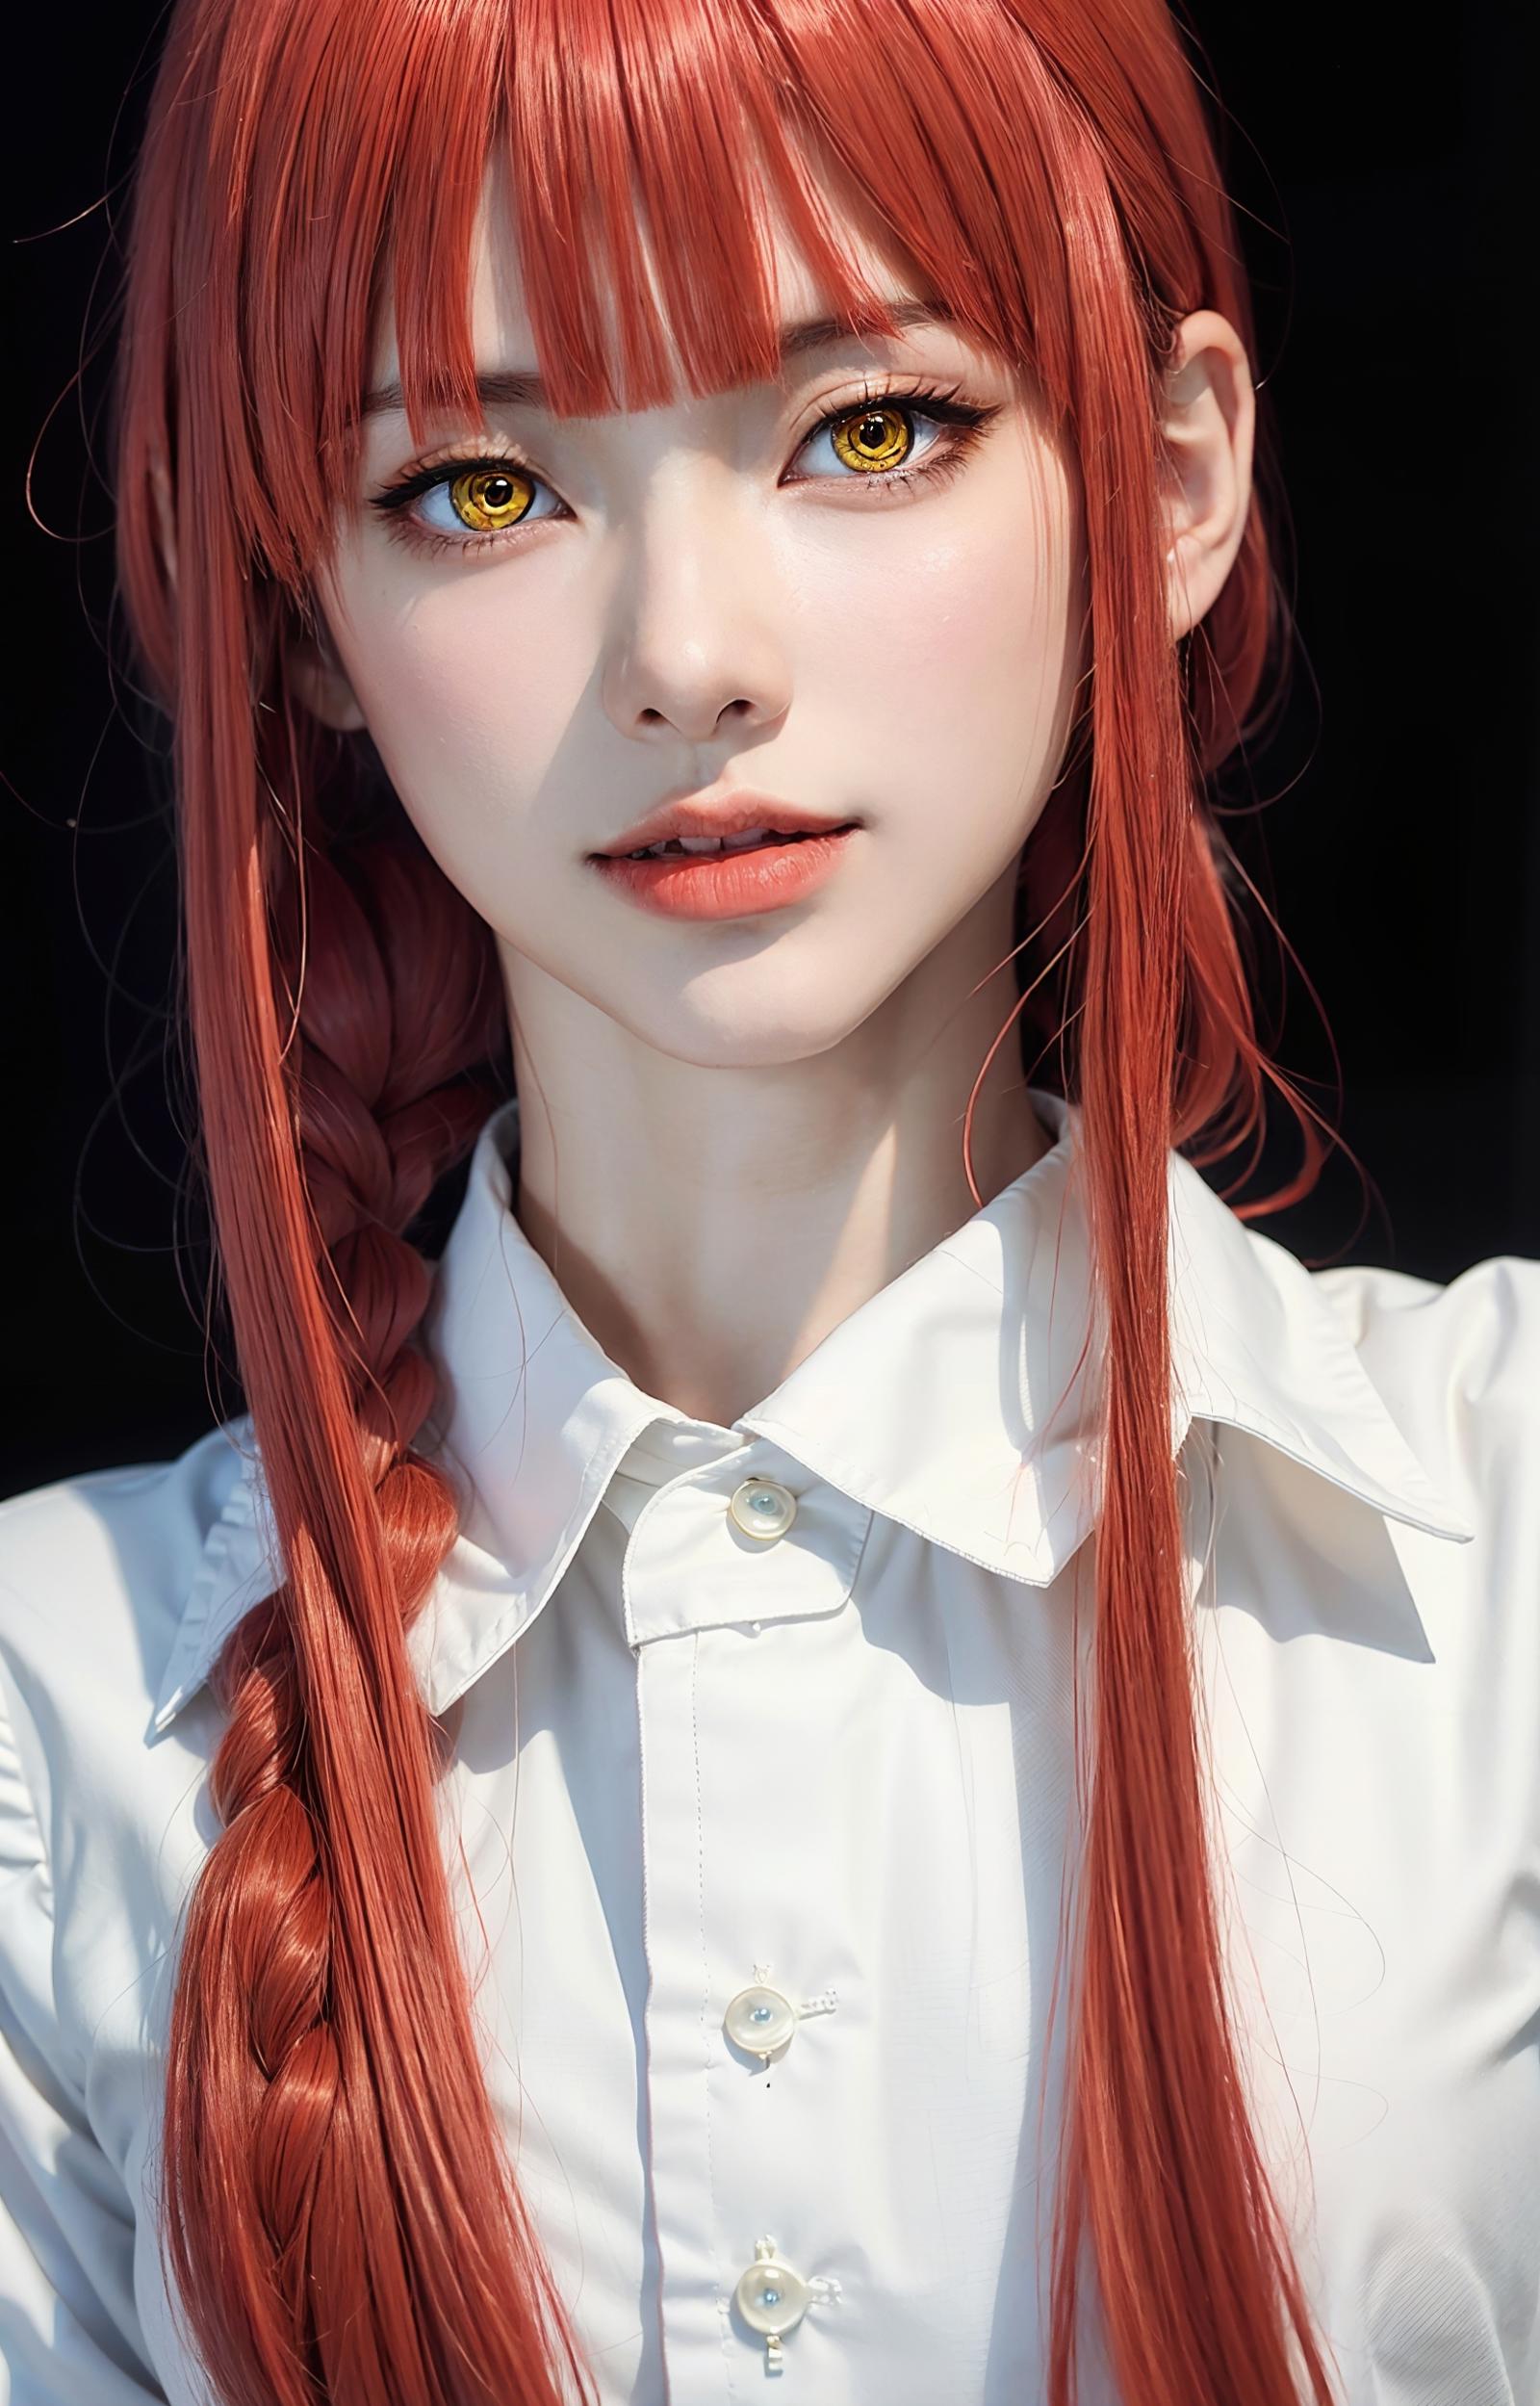 AI model image by 1241878379188